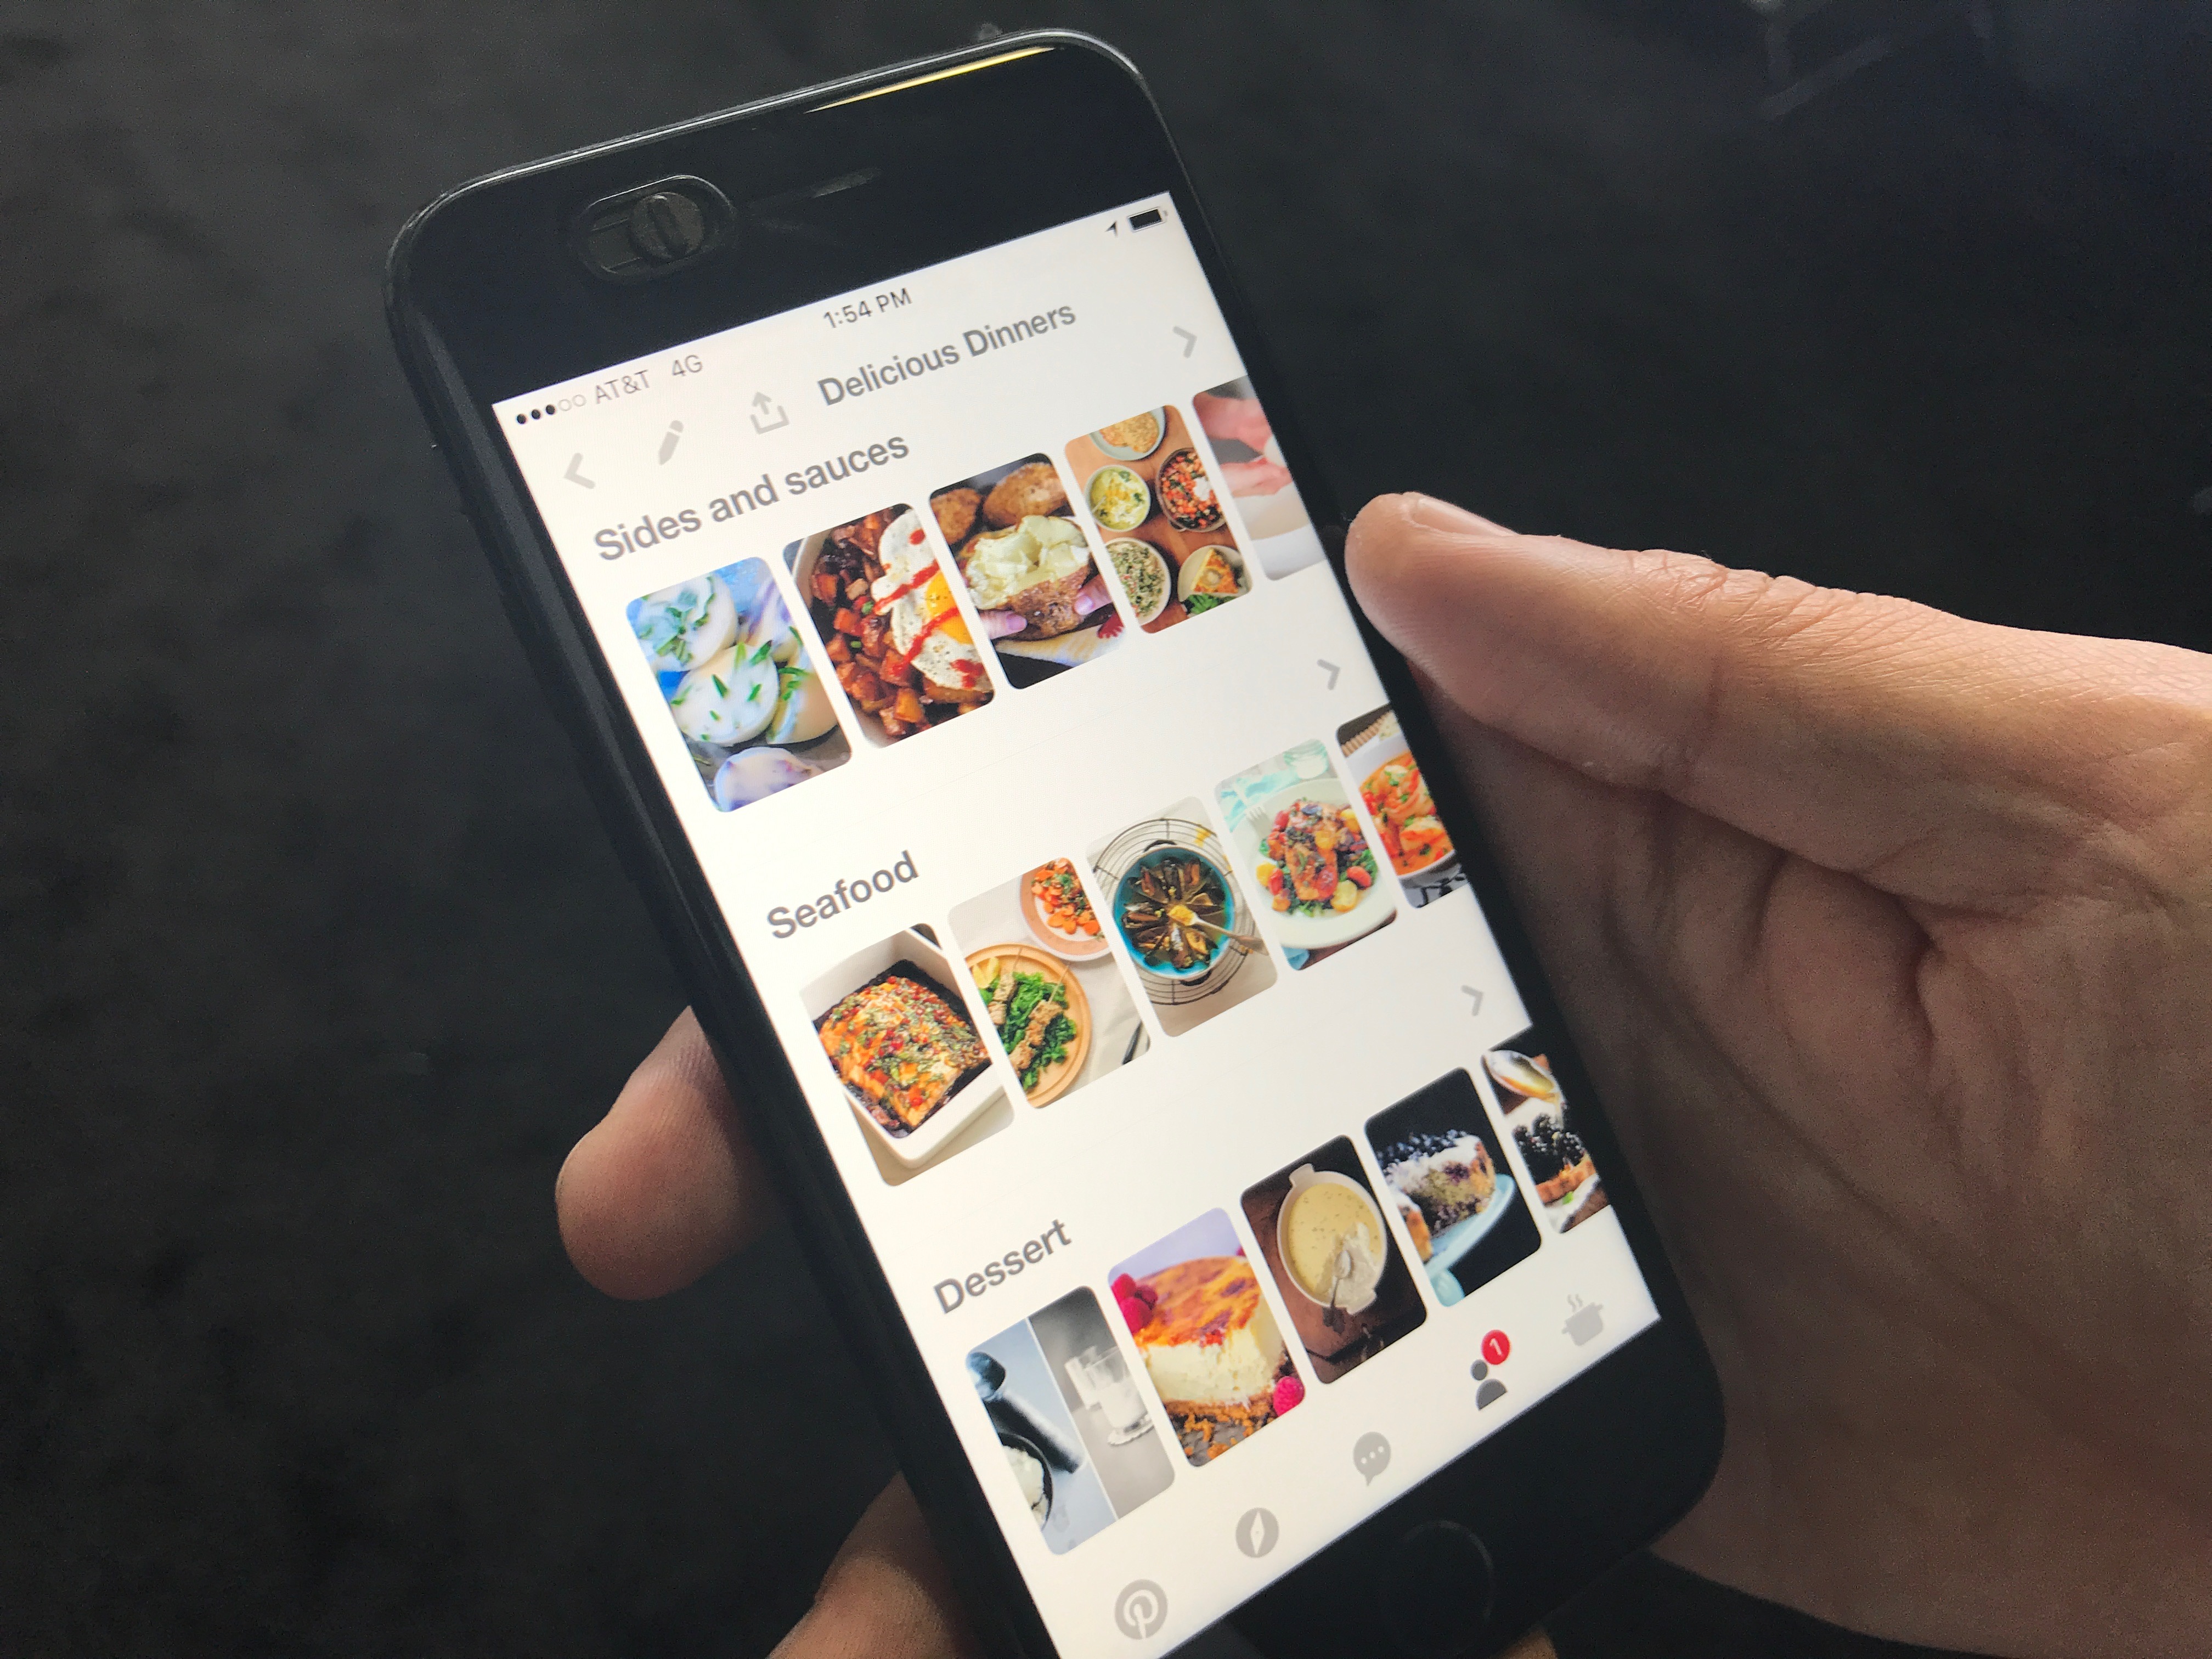 Pinterest’s new Sections feature begins beta testing, public launch in ‘weeks’